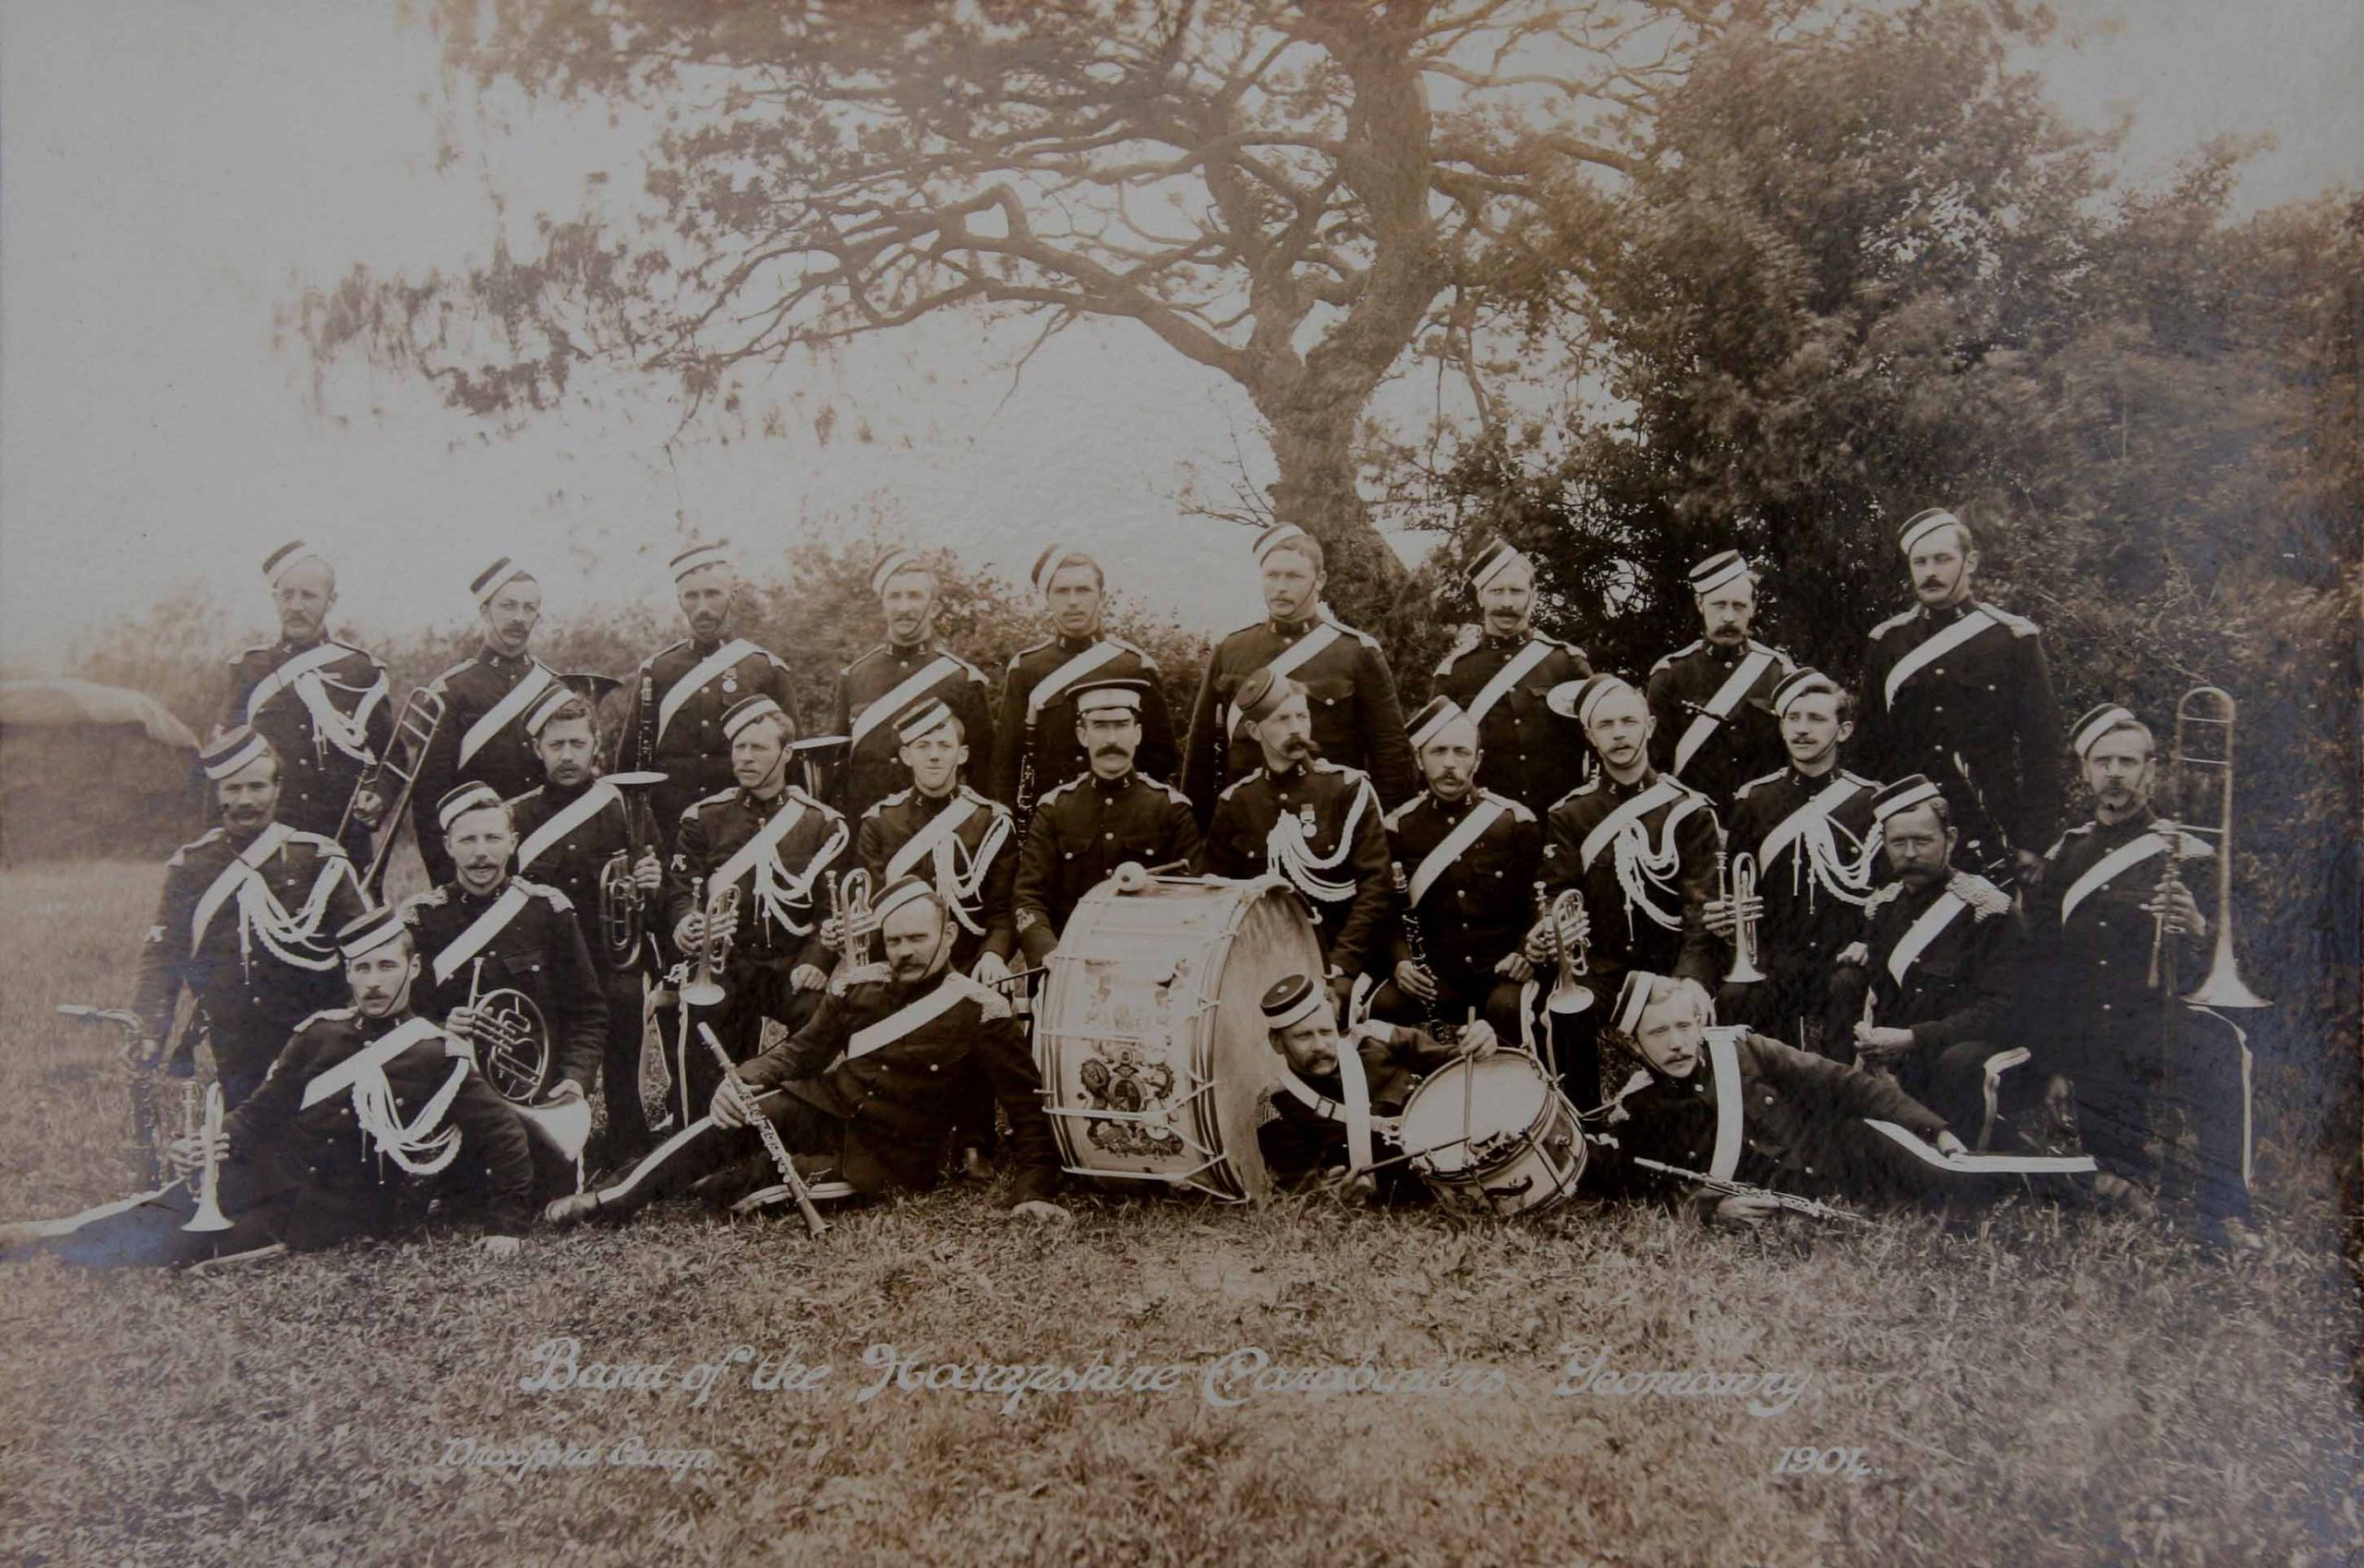 C:\Documents and Settings\chris\My Documents\My Pictures\Old Bishopstoke Pictures\Band of the Hampshire Carabiniers Yeomanry, Droxford Camp 1904. F.C. Humby to left of drum with clarinet b.jpg